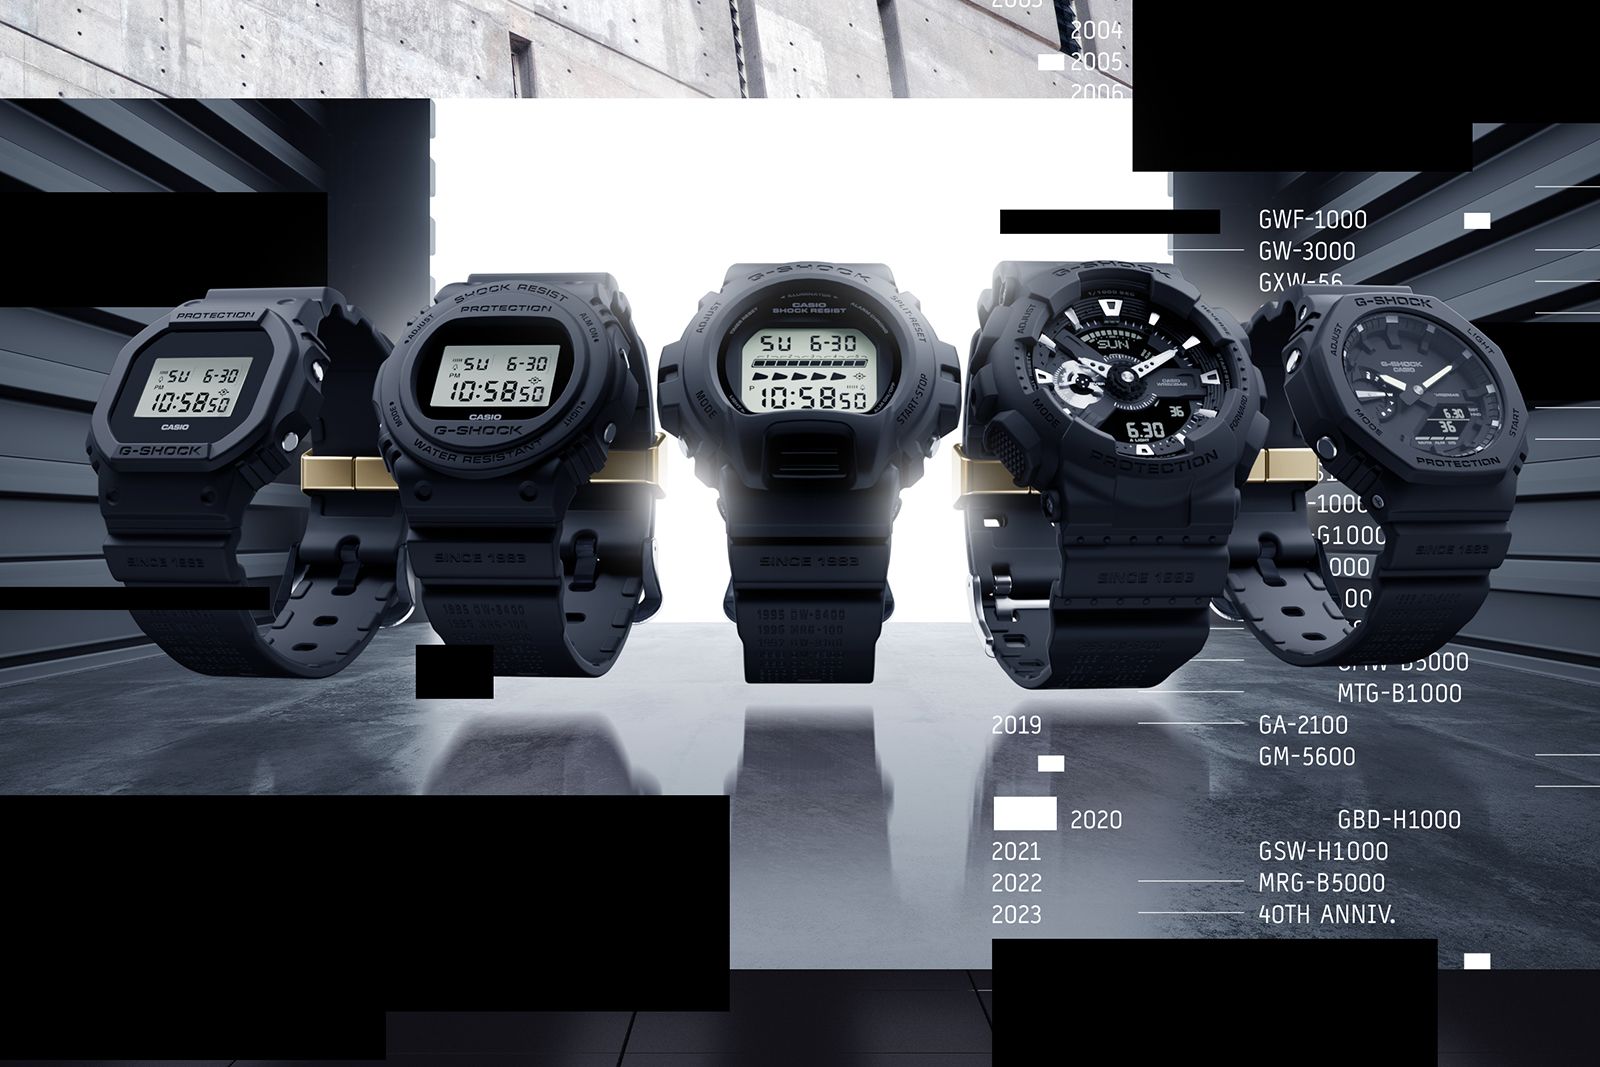 G-Shock Remaster series takes us right back to the beginning with classic designs